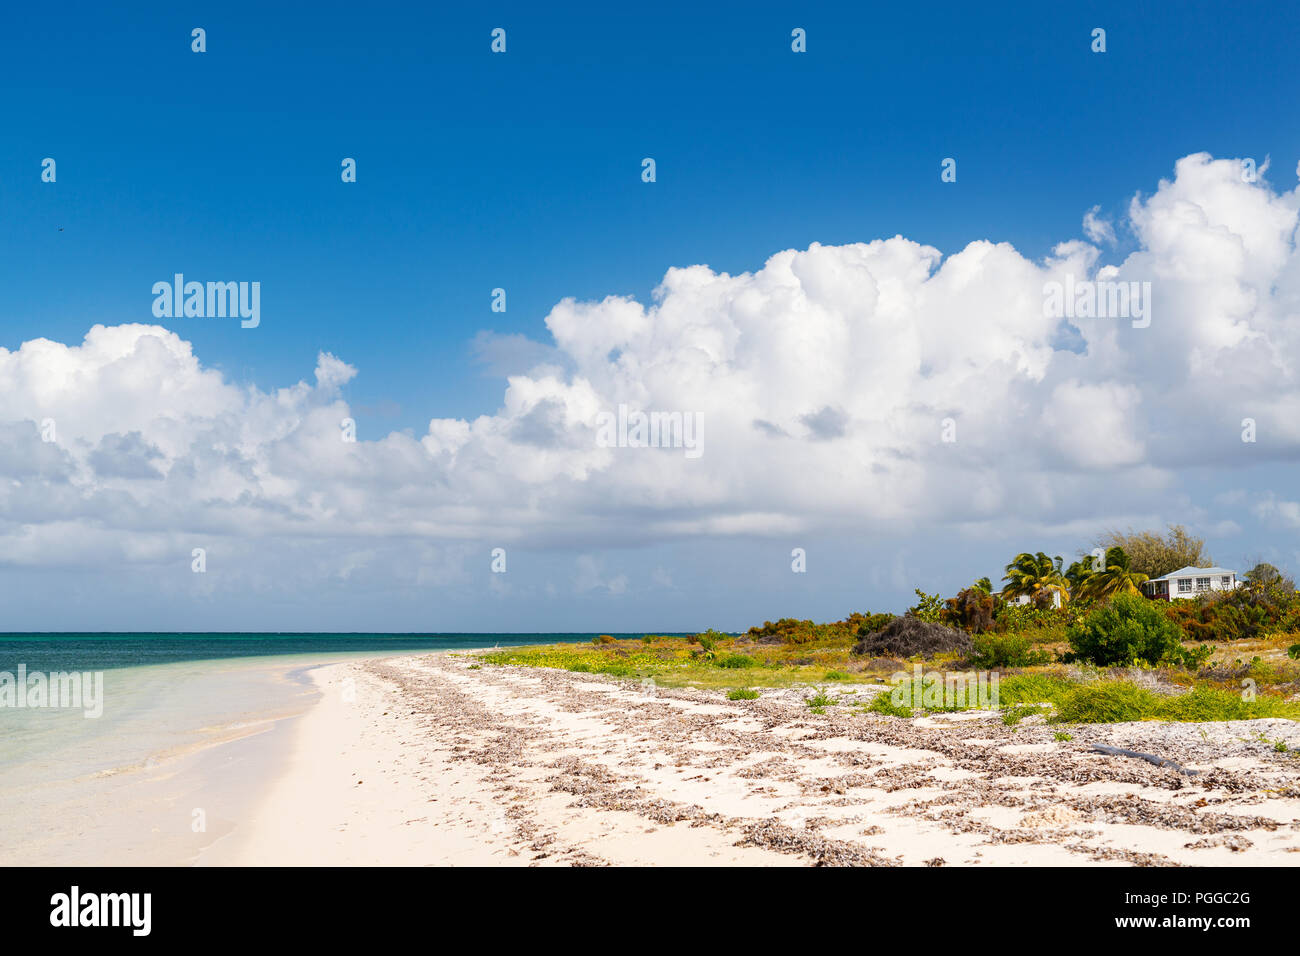 Idyllic tropical beach on Barbuda island in Caribbean with white sand, turquoise ocean water and blue sky Stock Photo